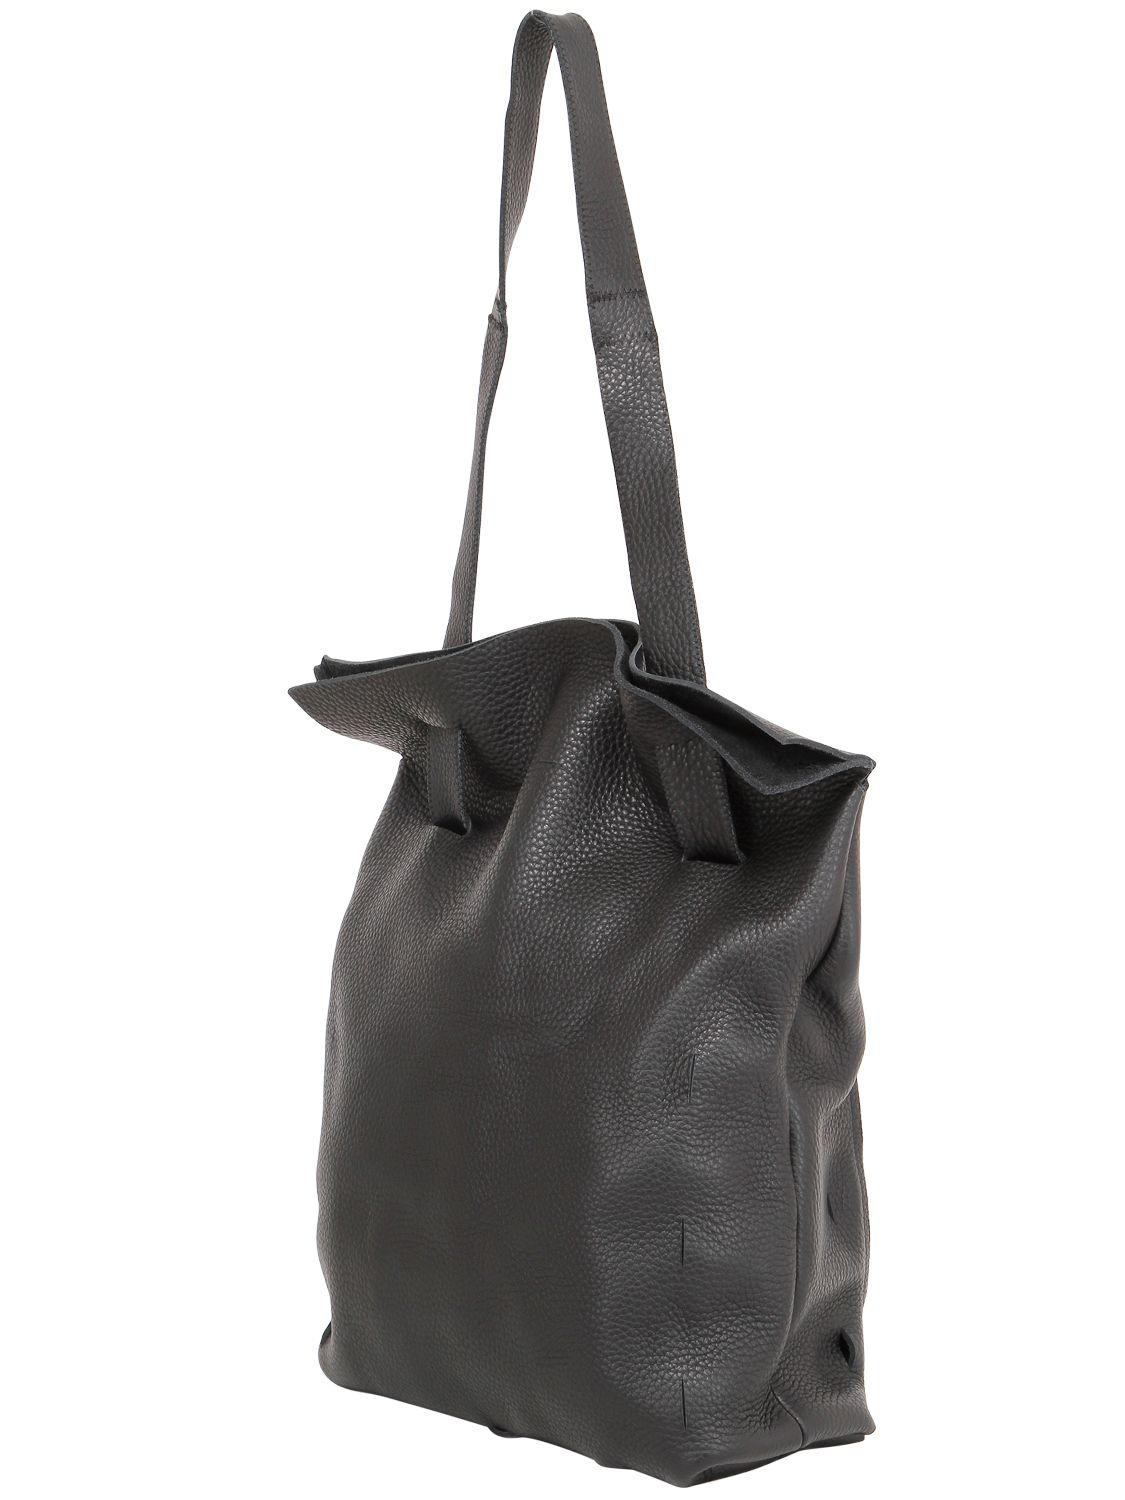 Lyst - Peter Non Textured Leather Hobo Bag in Black